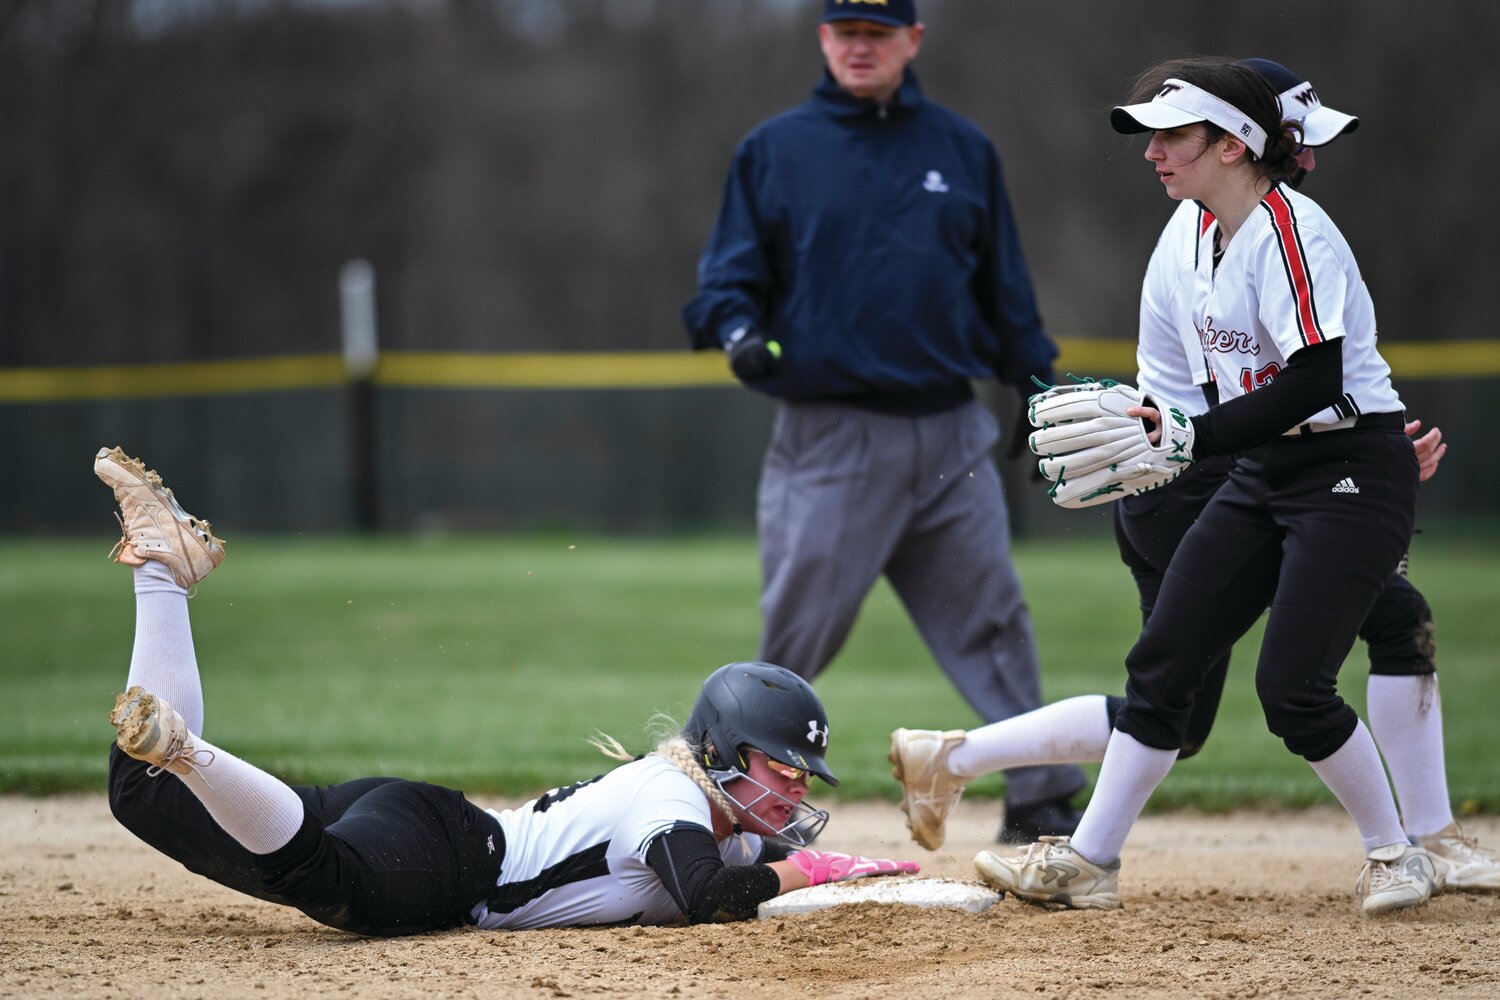 Archbishop Wood’s Allison Siegfried successfully dives back to second after avoiding a double play in the third inning.